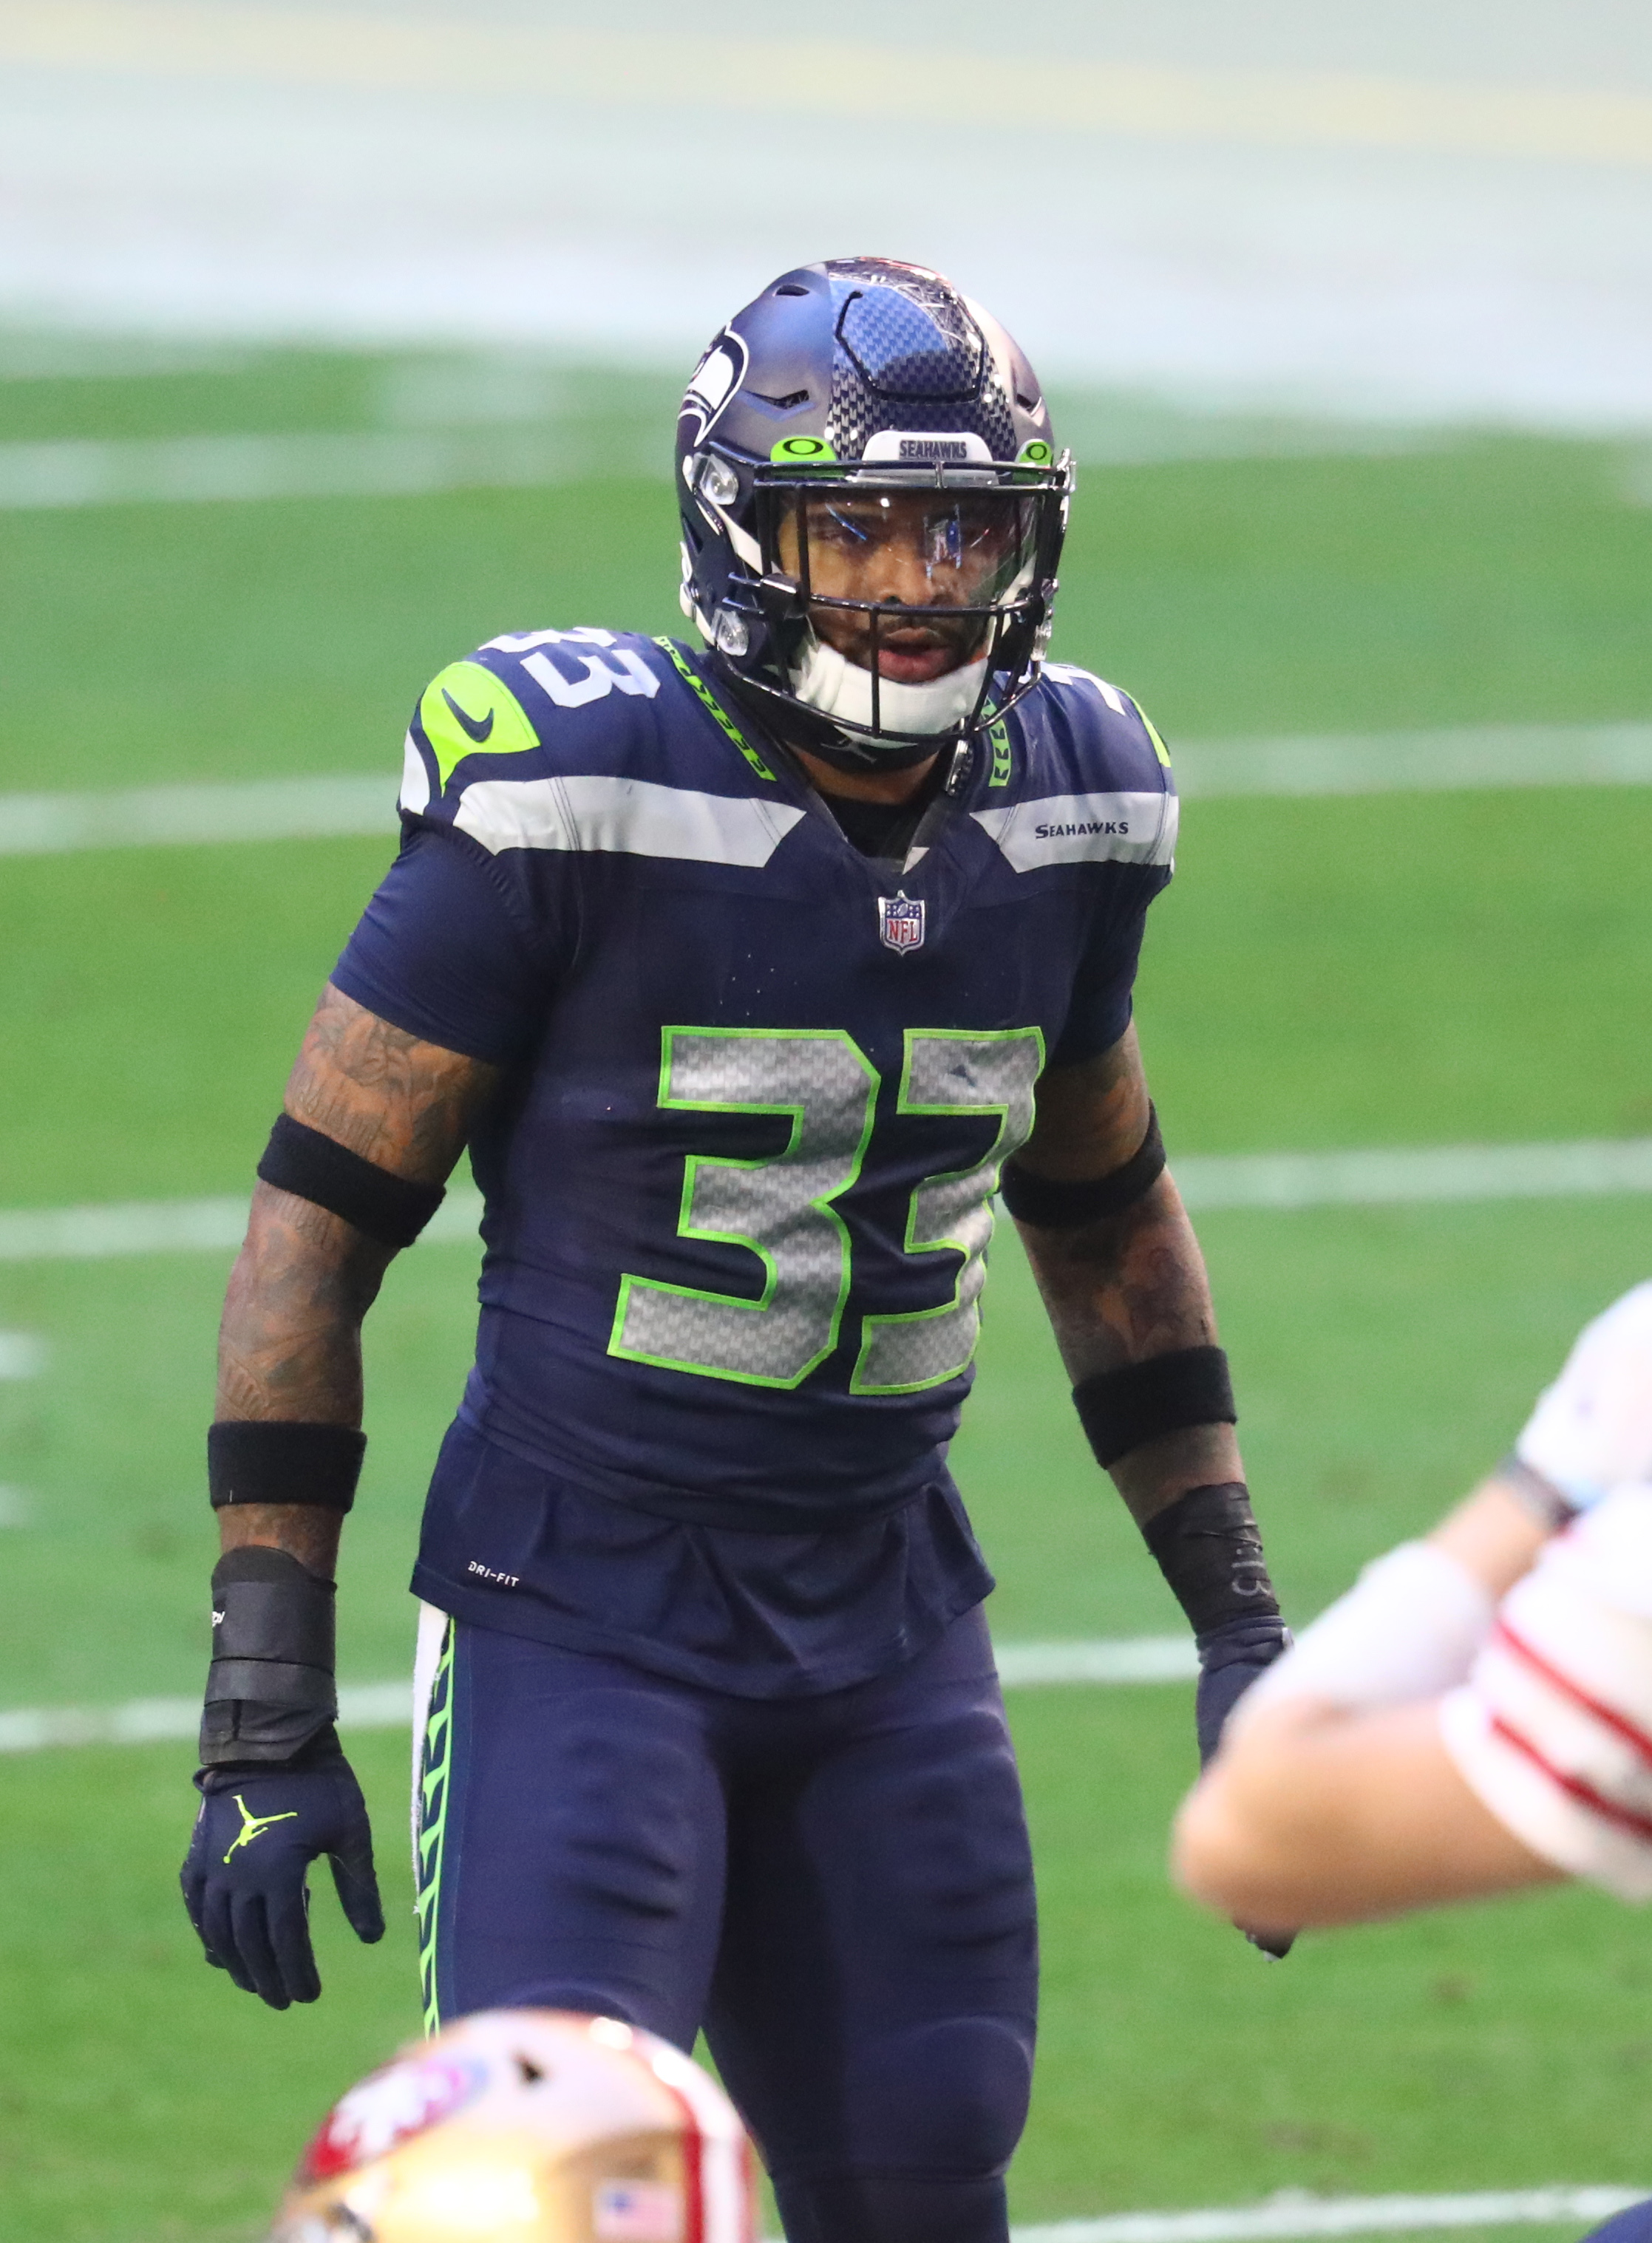 Seahawks Activate S Jamal Adams From Active/PUP List